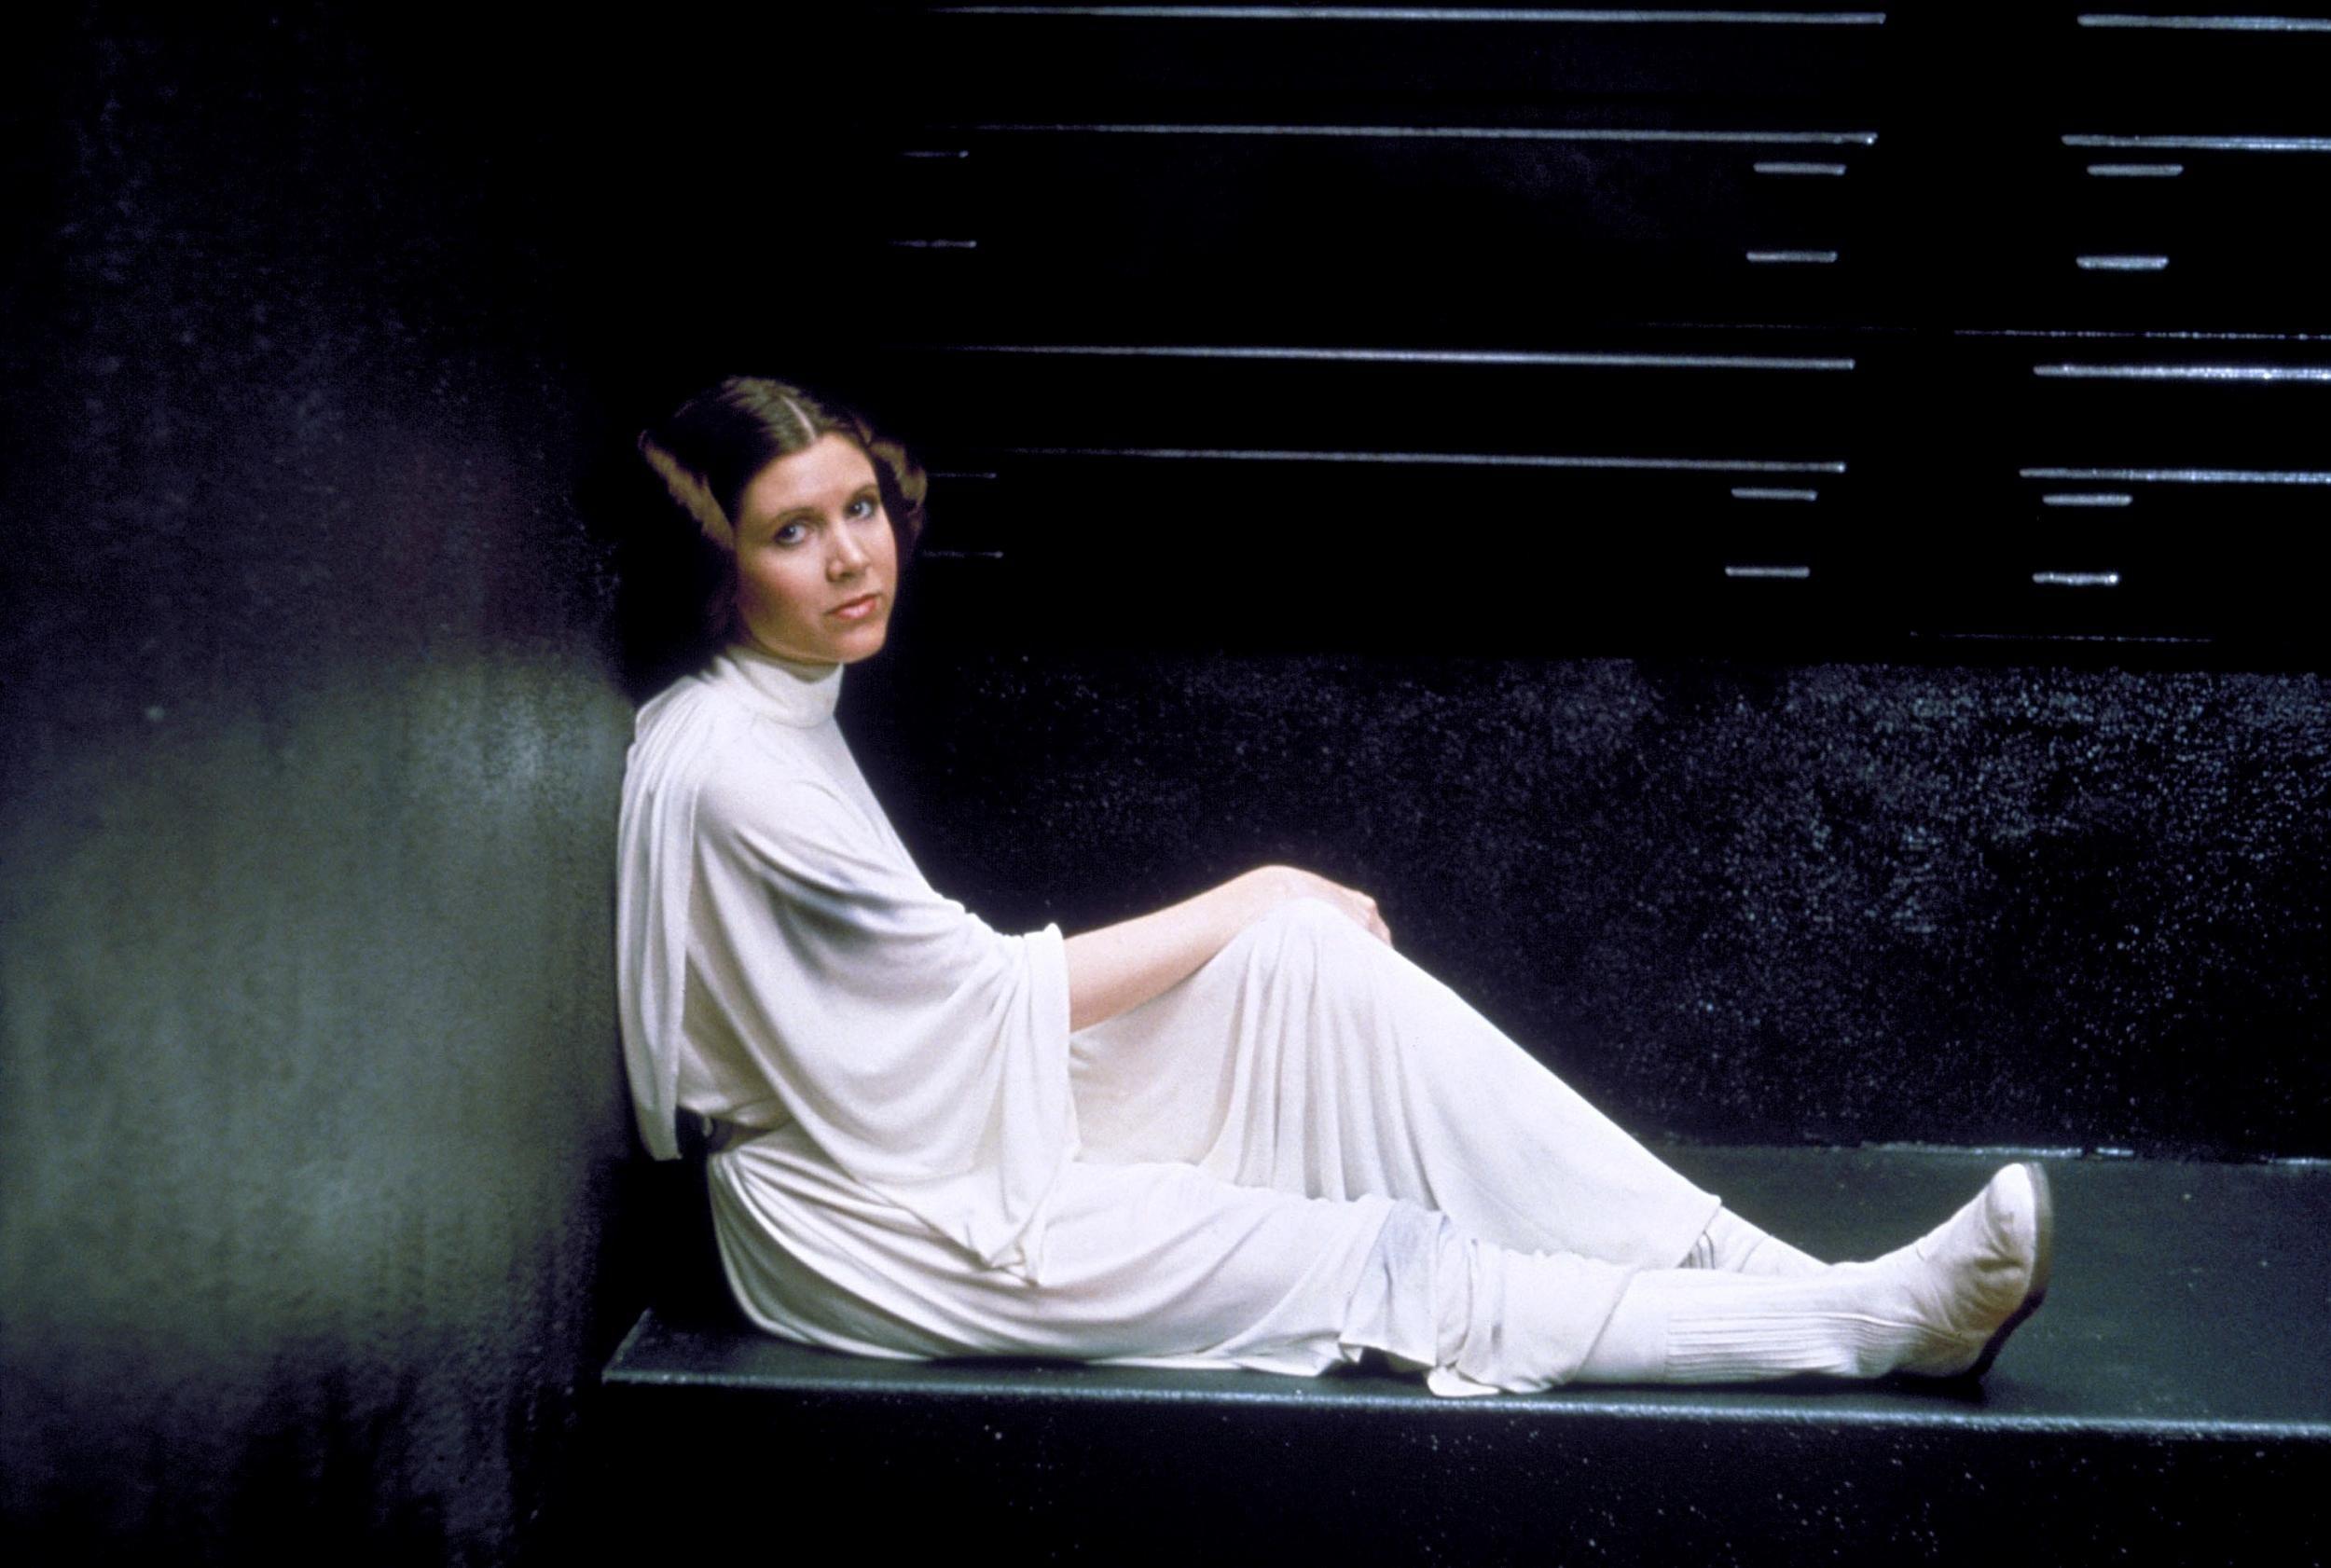 Petition launched calling for Star Wars' Princess Leia to be made an